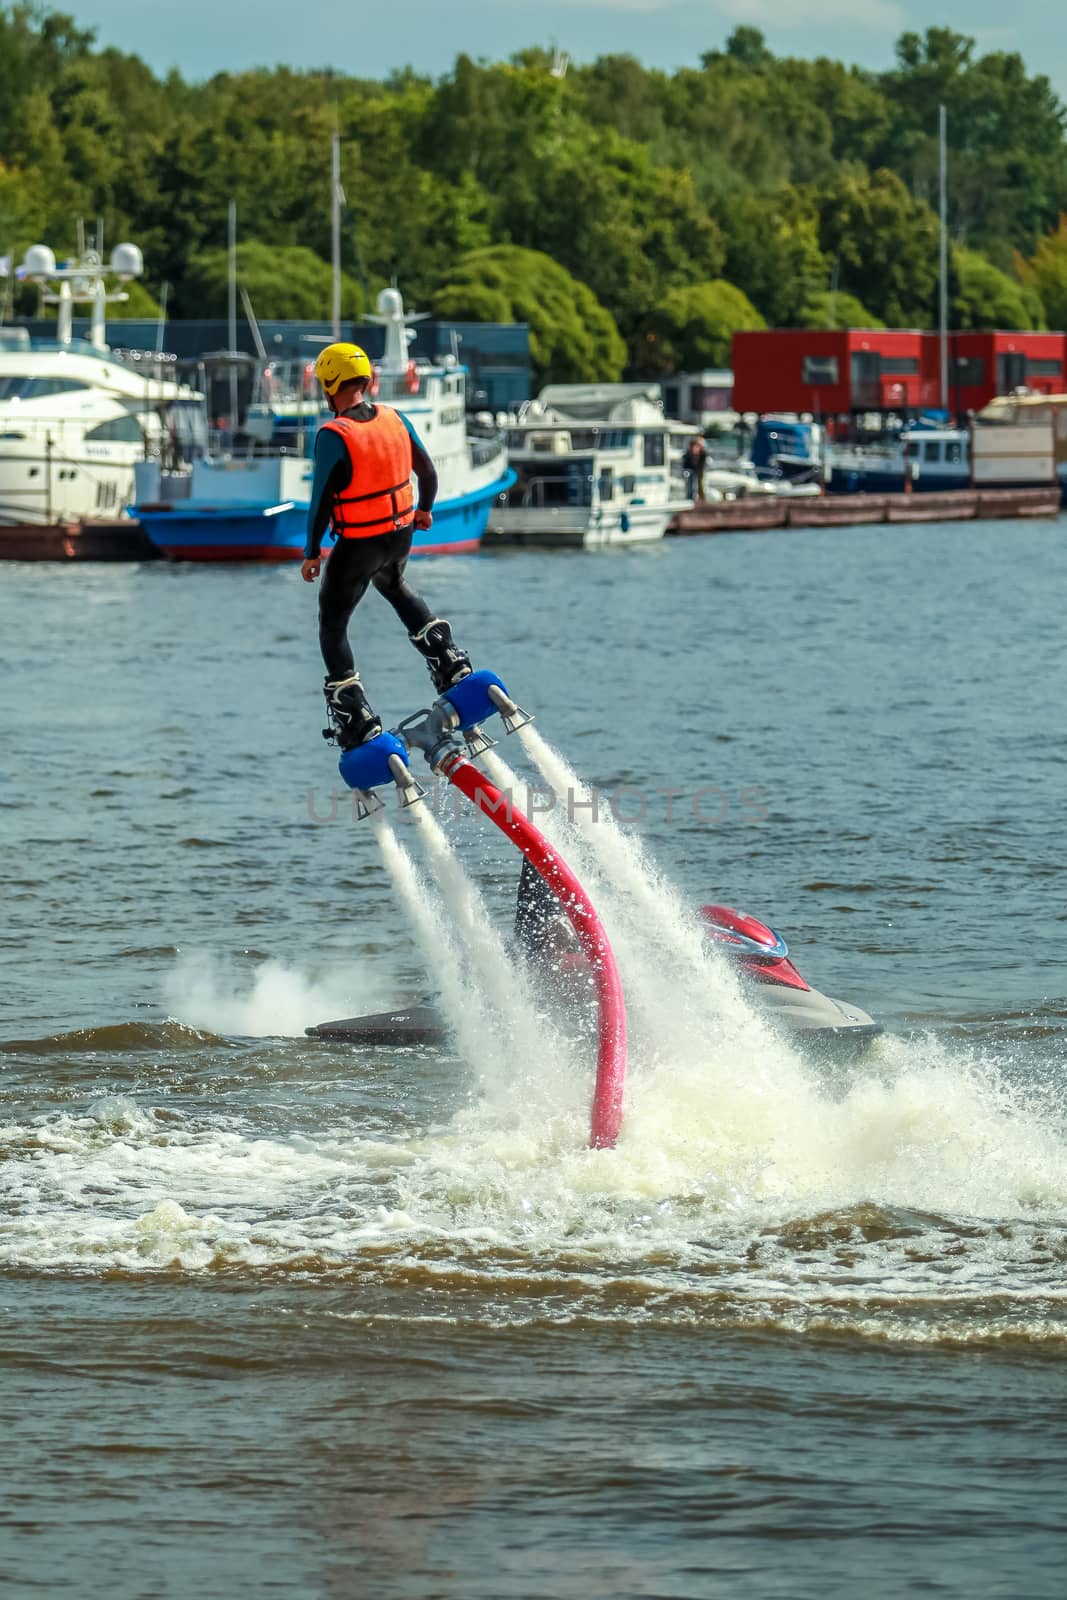 Flyboard player, flying on the board, can rise to a height of 19 meters, perform all sorts of tricks: flips, rotations around its axis, turns, hovering in the air, spectacular exits and dives.